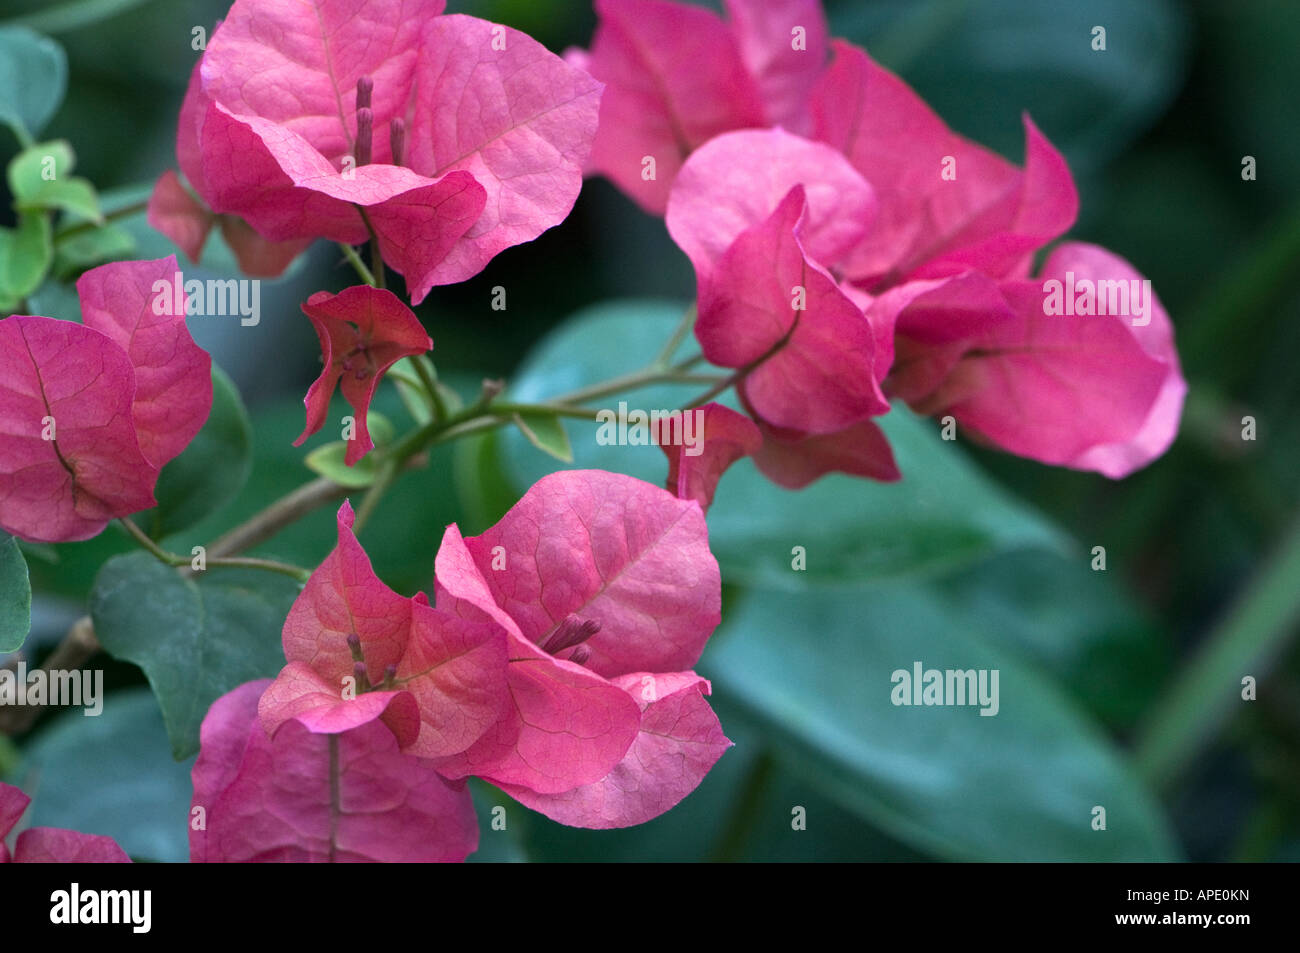 Bougainvillea in hot pink, a thorny tropical climber. Stock Photo